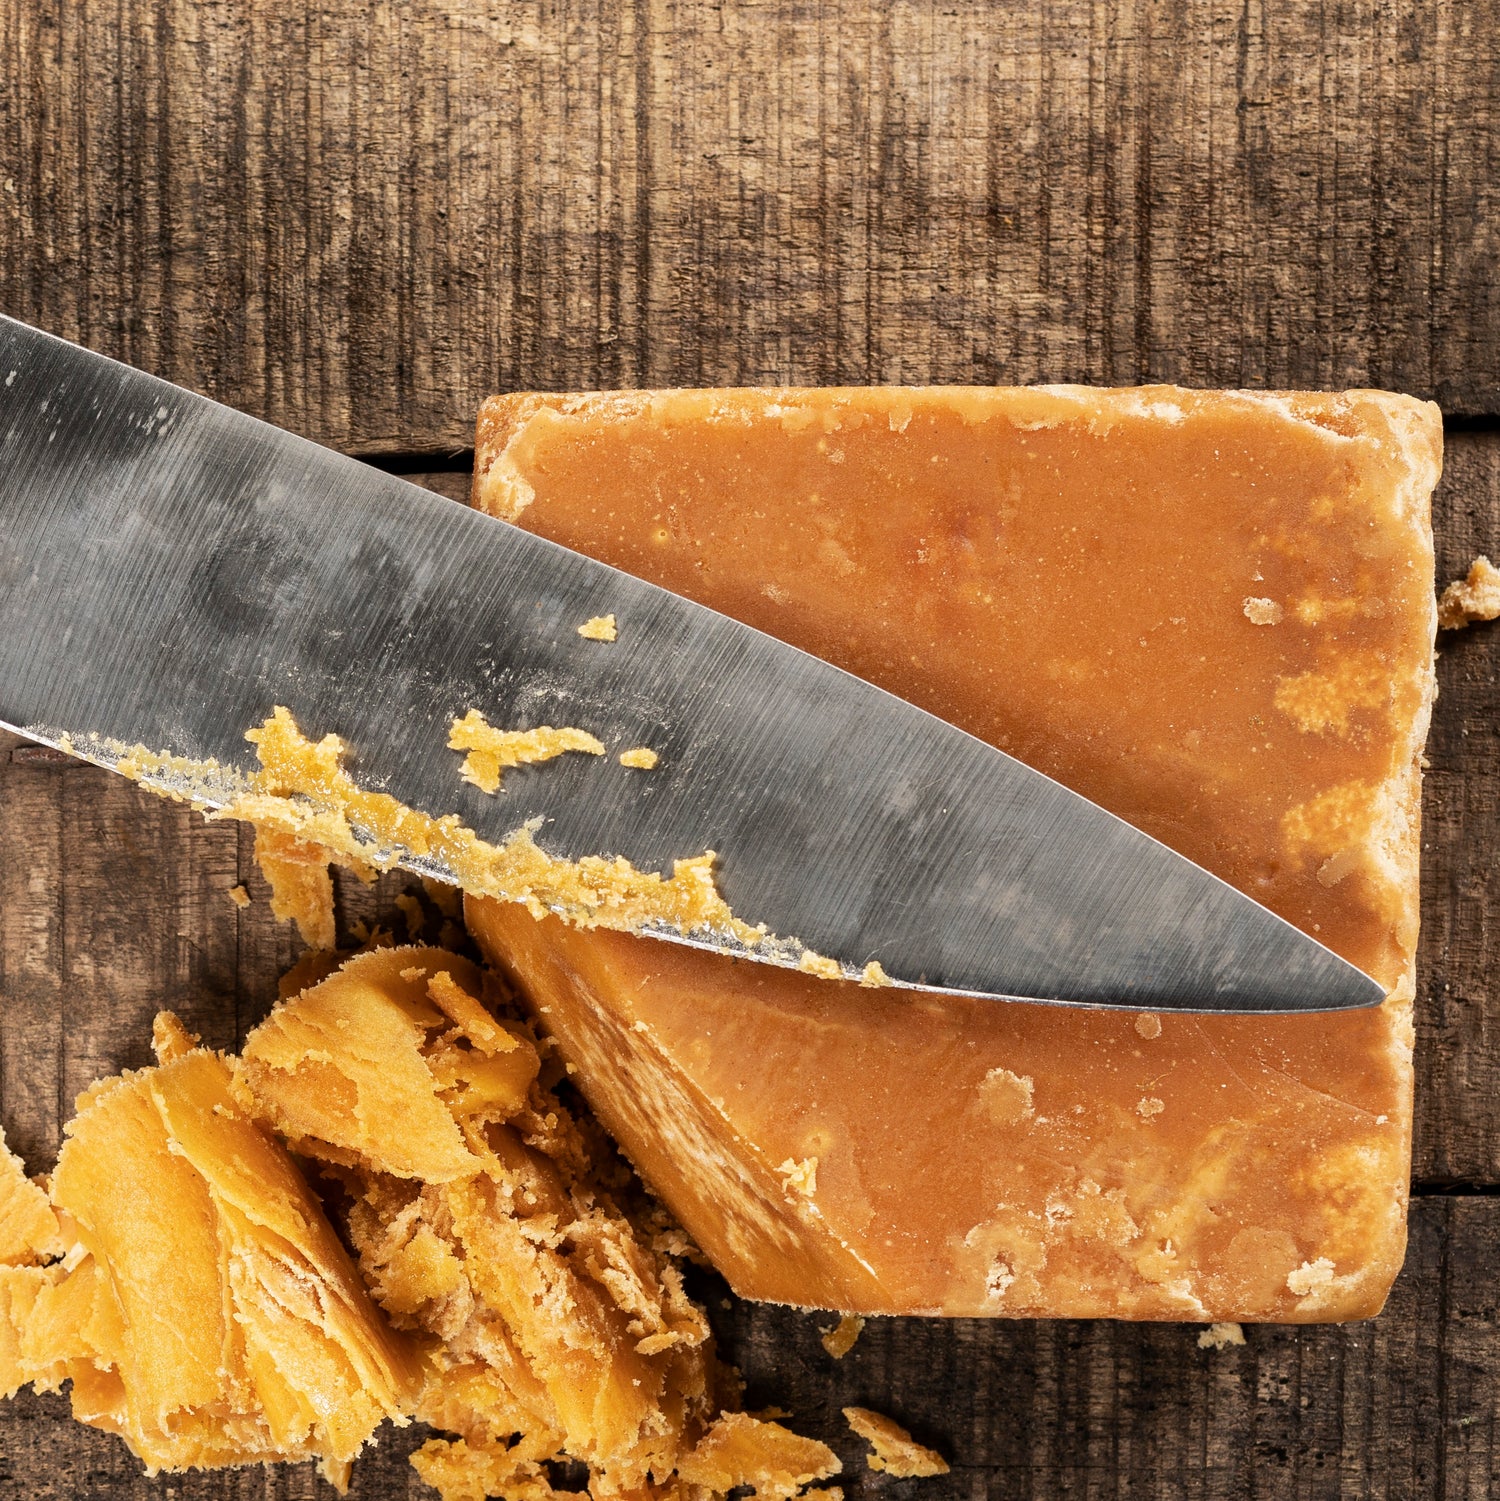 Jaggery Vs Sugar - Are They Both The Same?